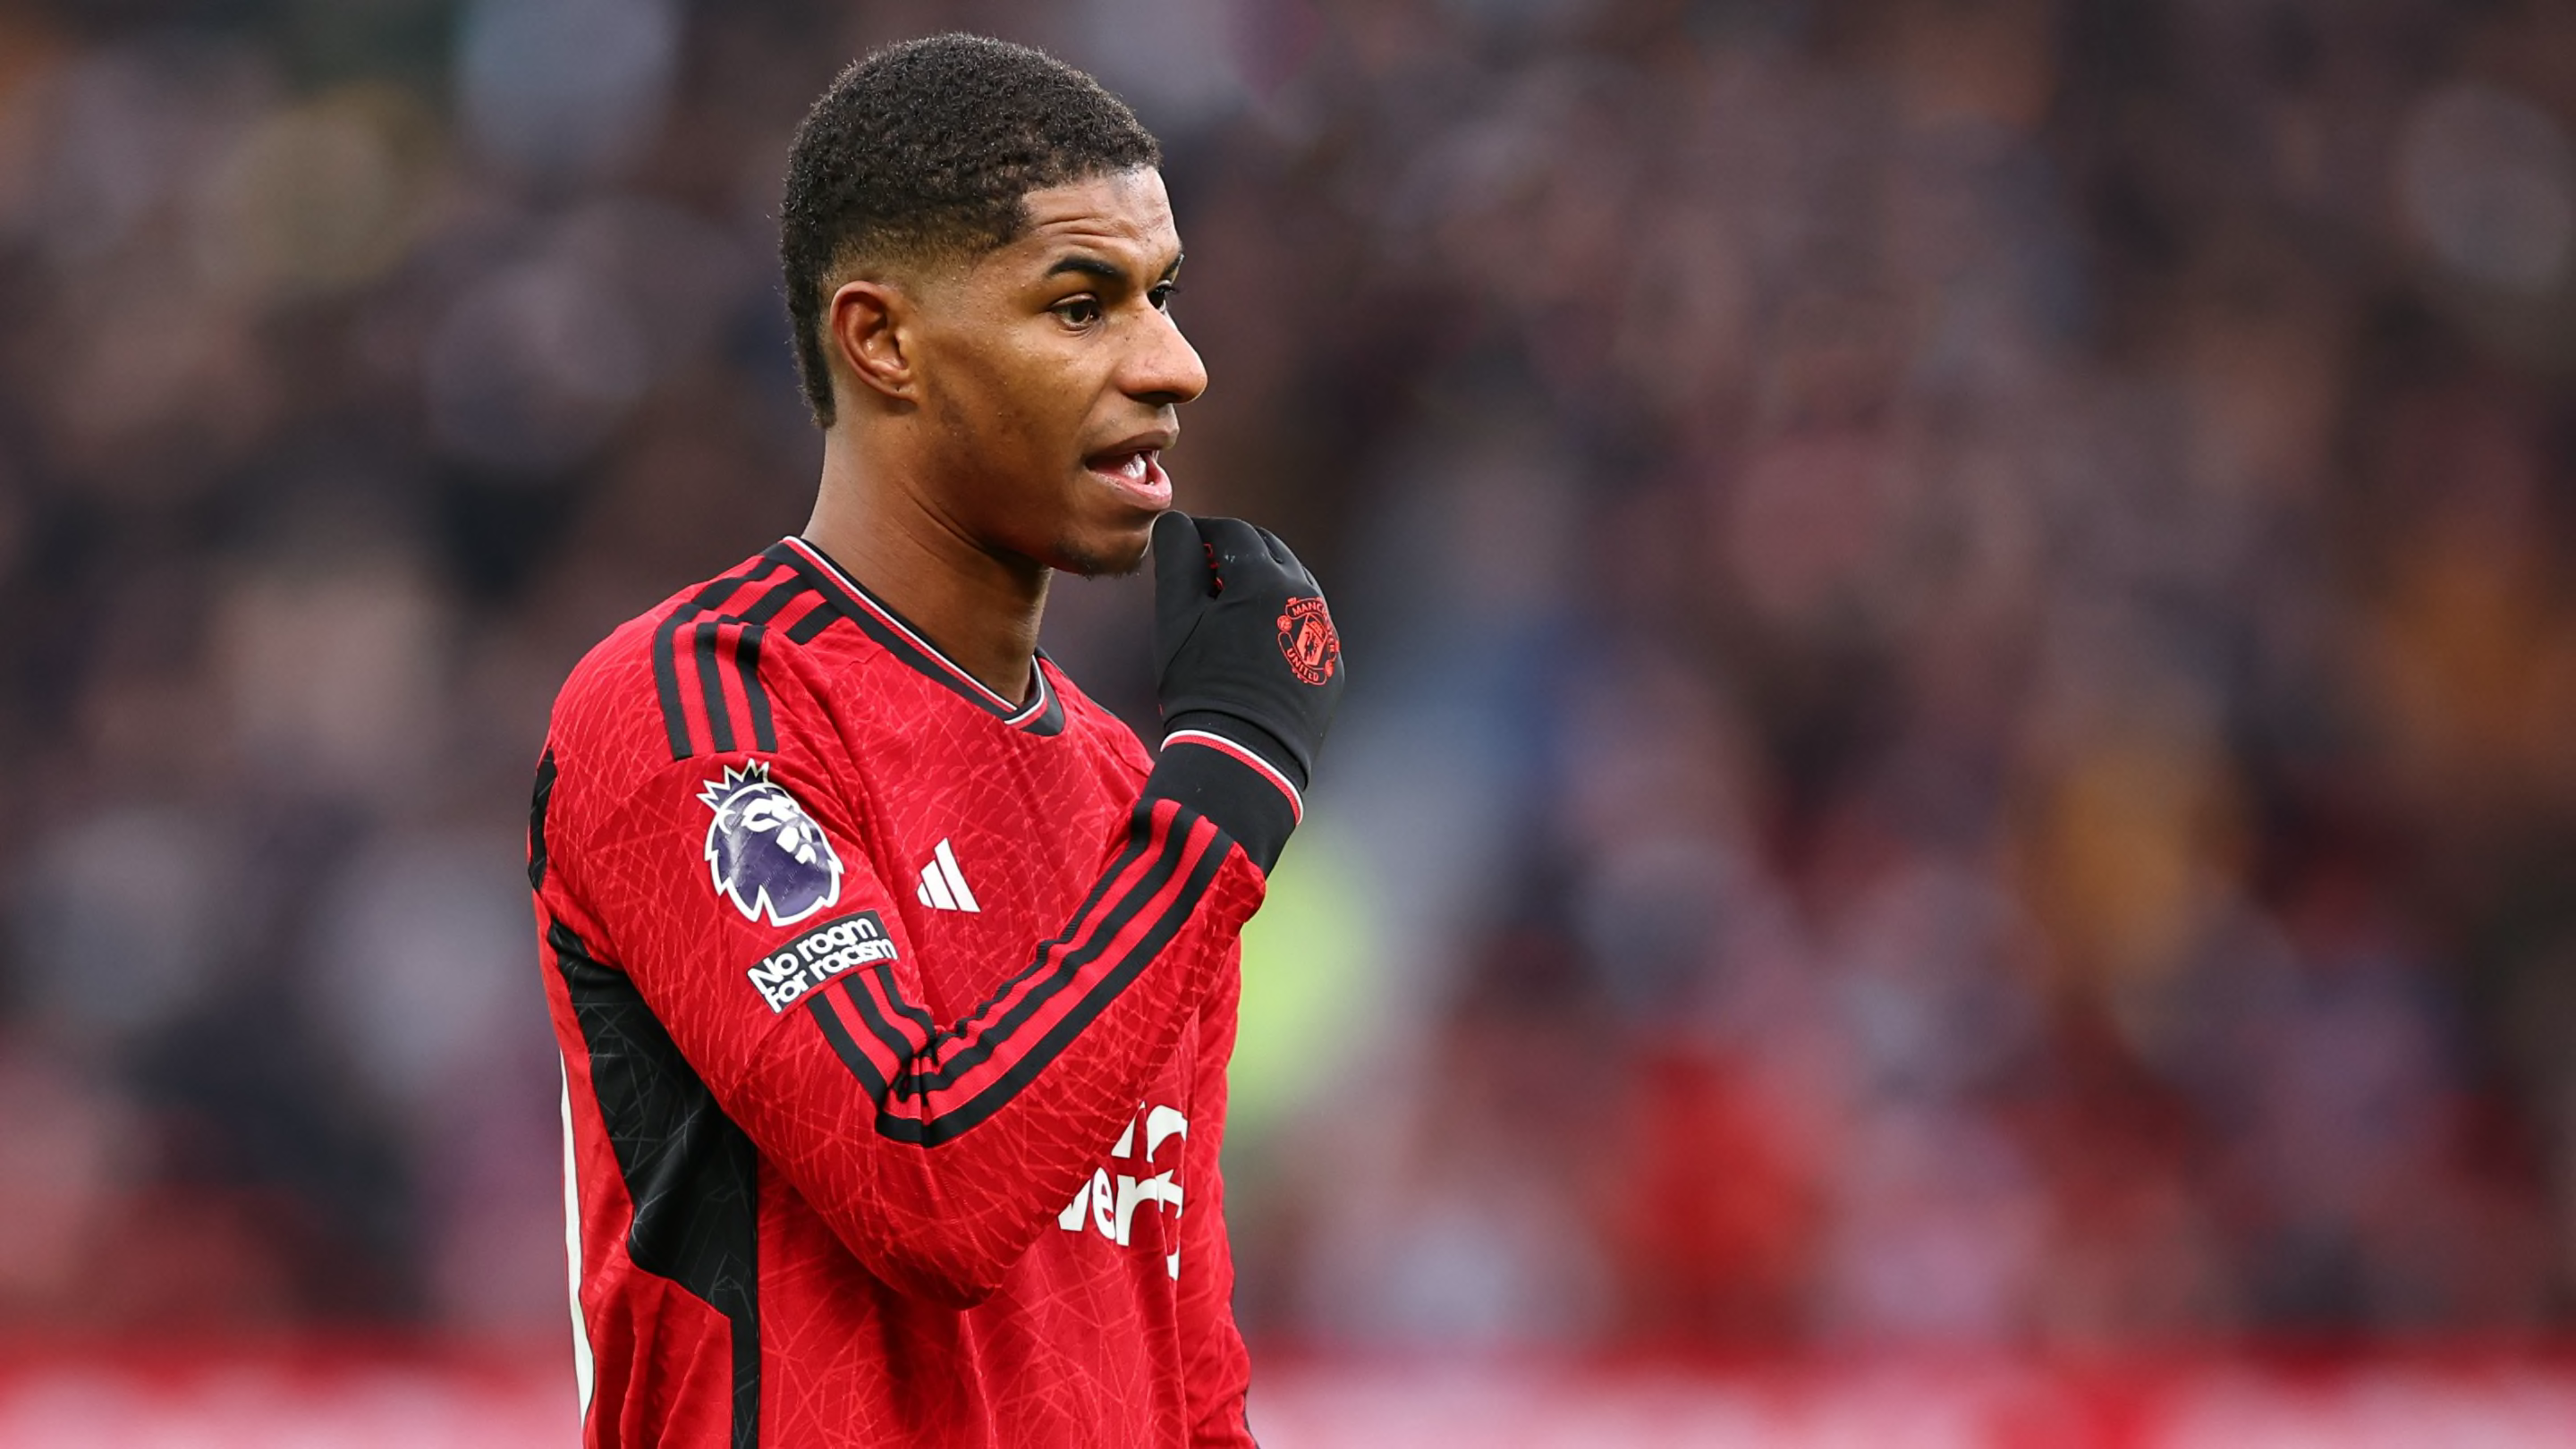 The two conditions required for Man Utd to sell Marcus Rashford - report